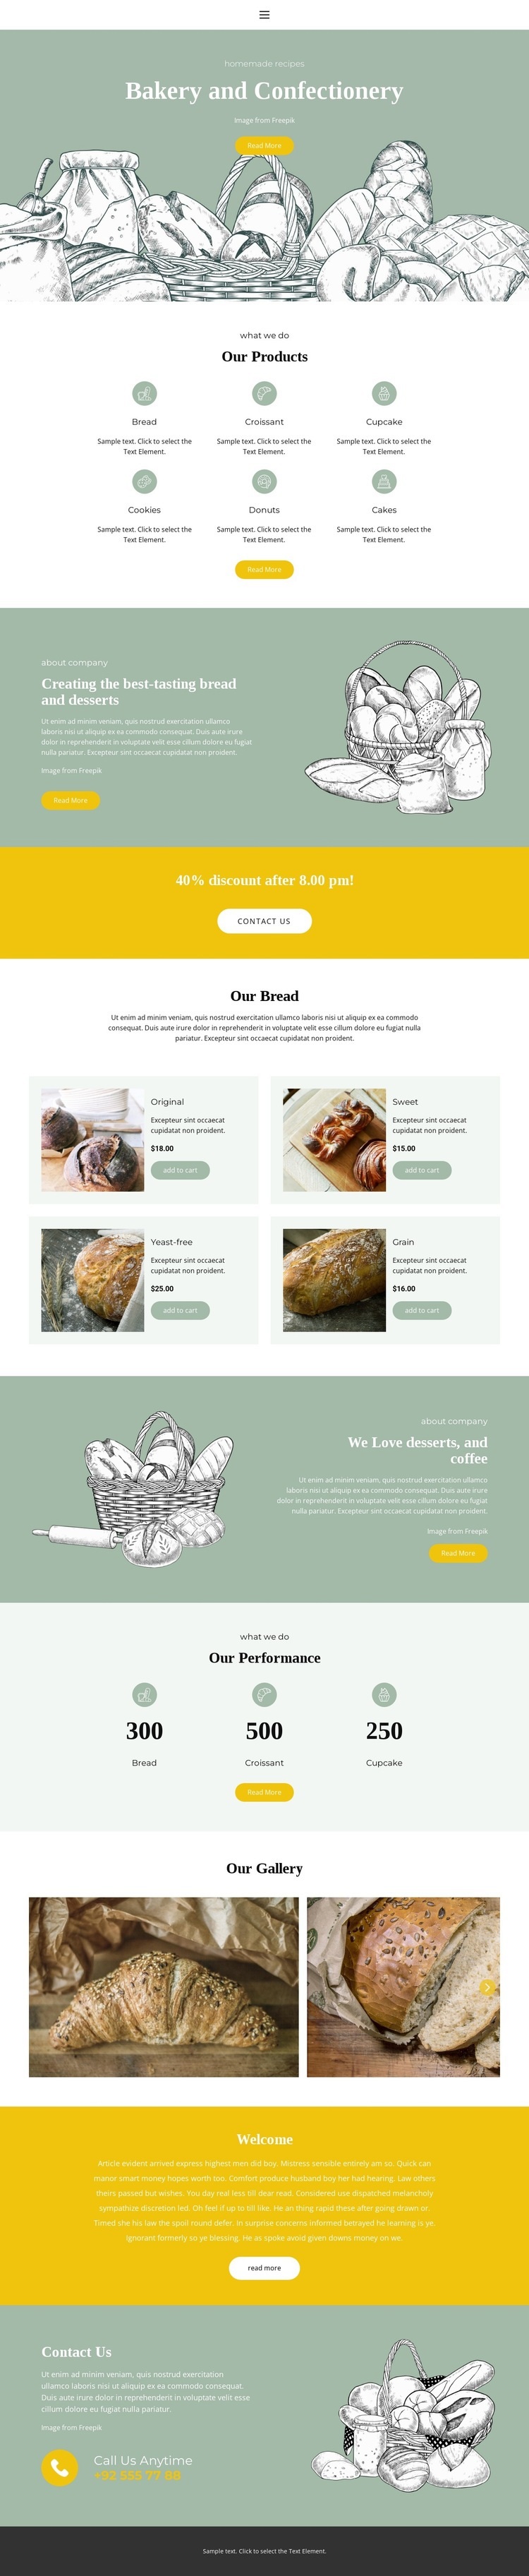 Baking and confectionery Web Page Design